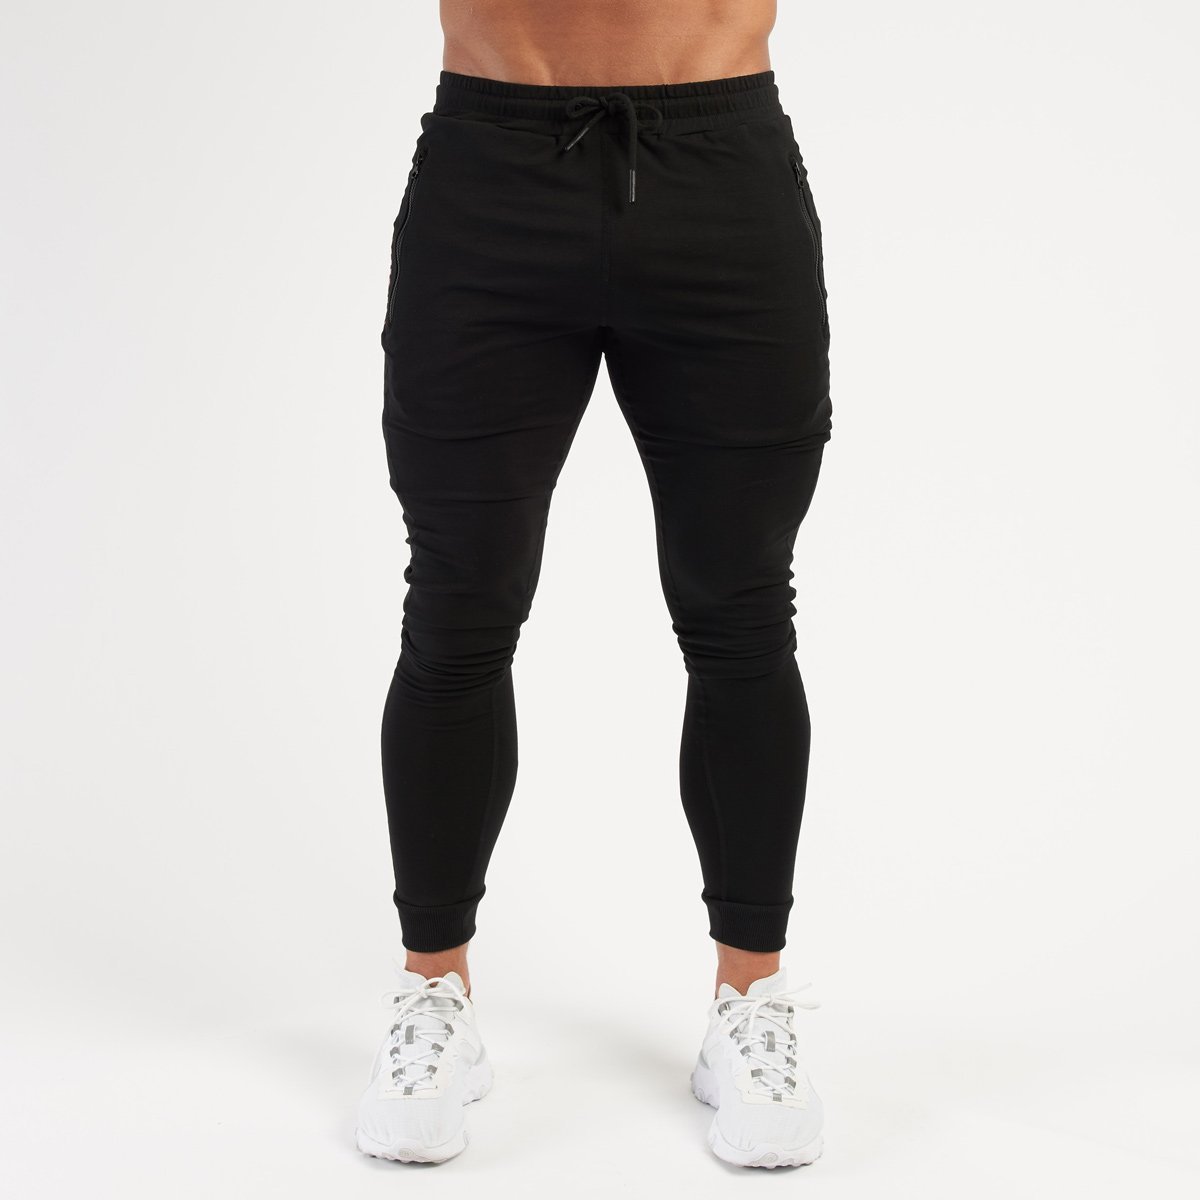 Fitness Night Running Cotton Casual Sports Pants For Men